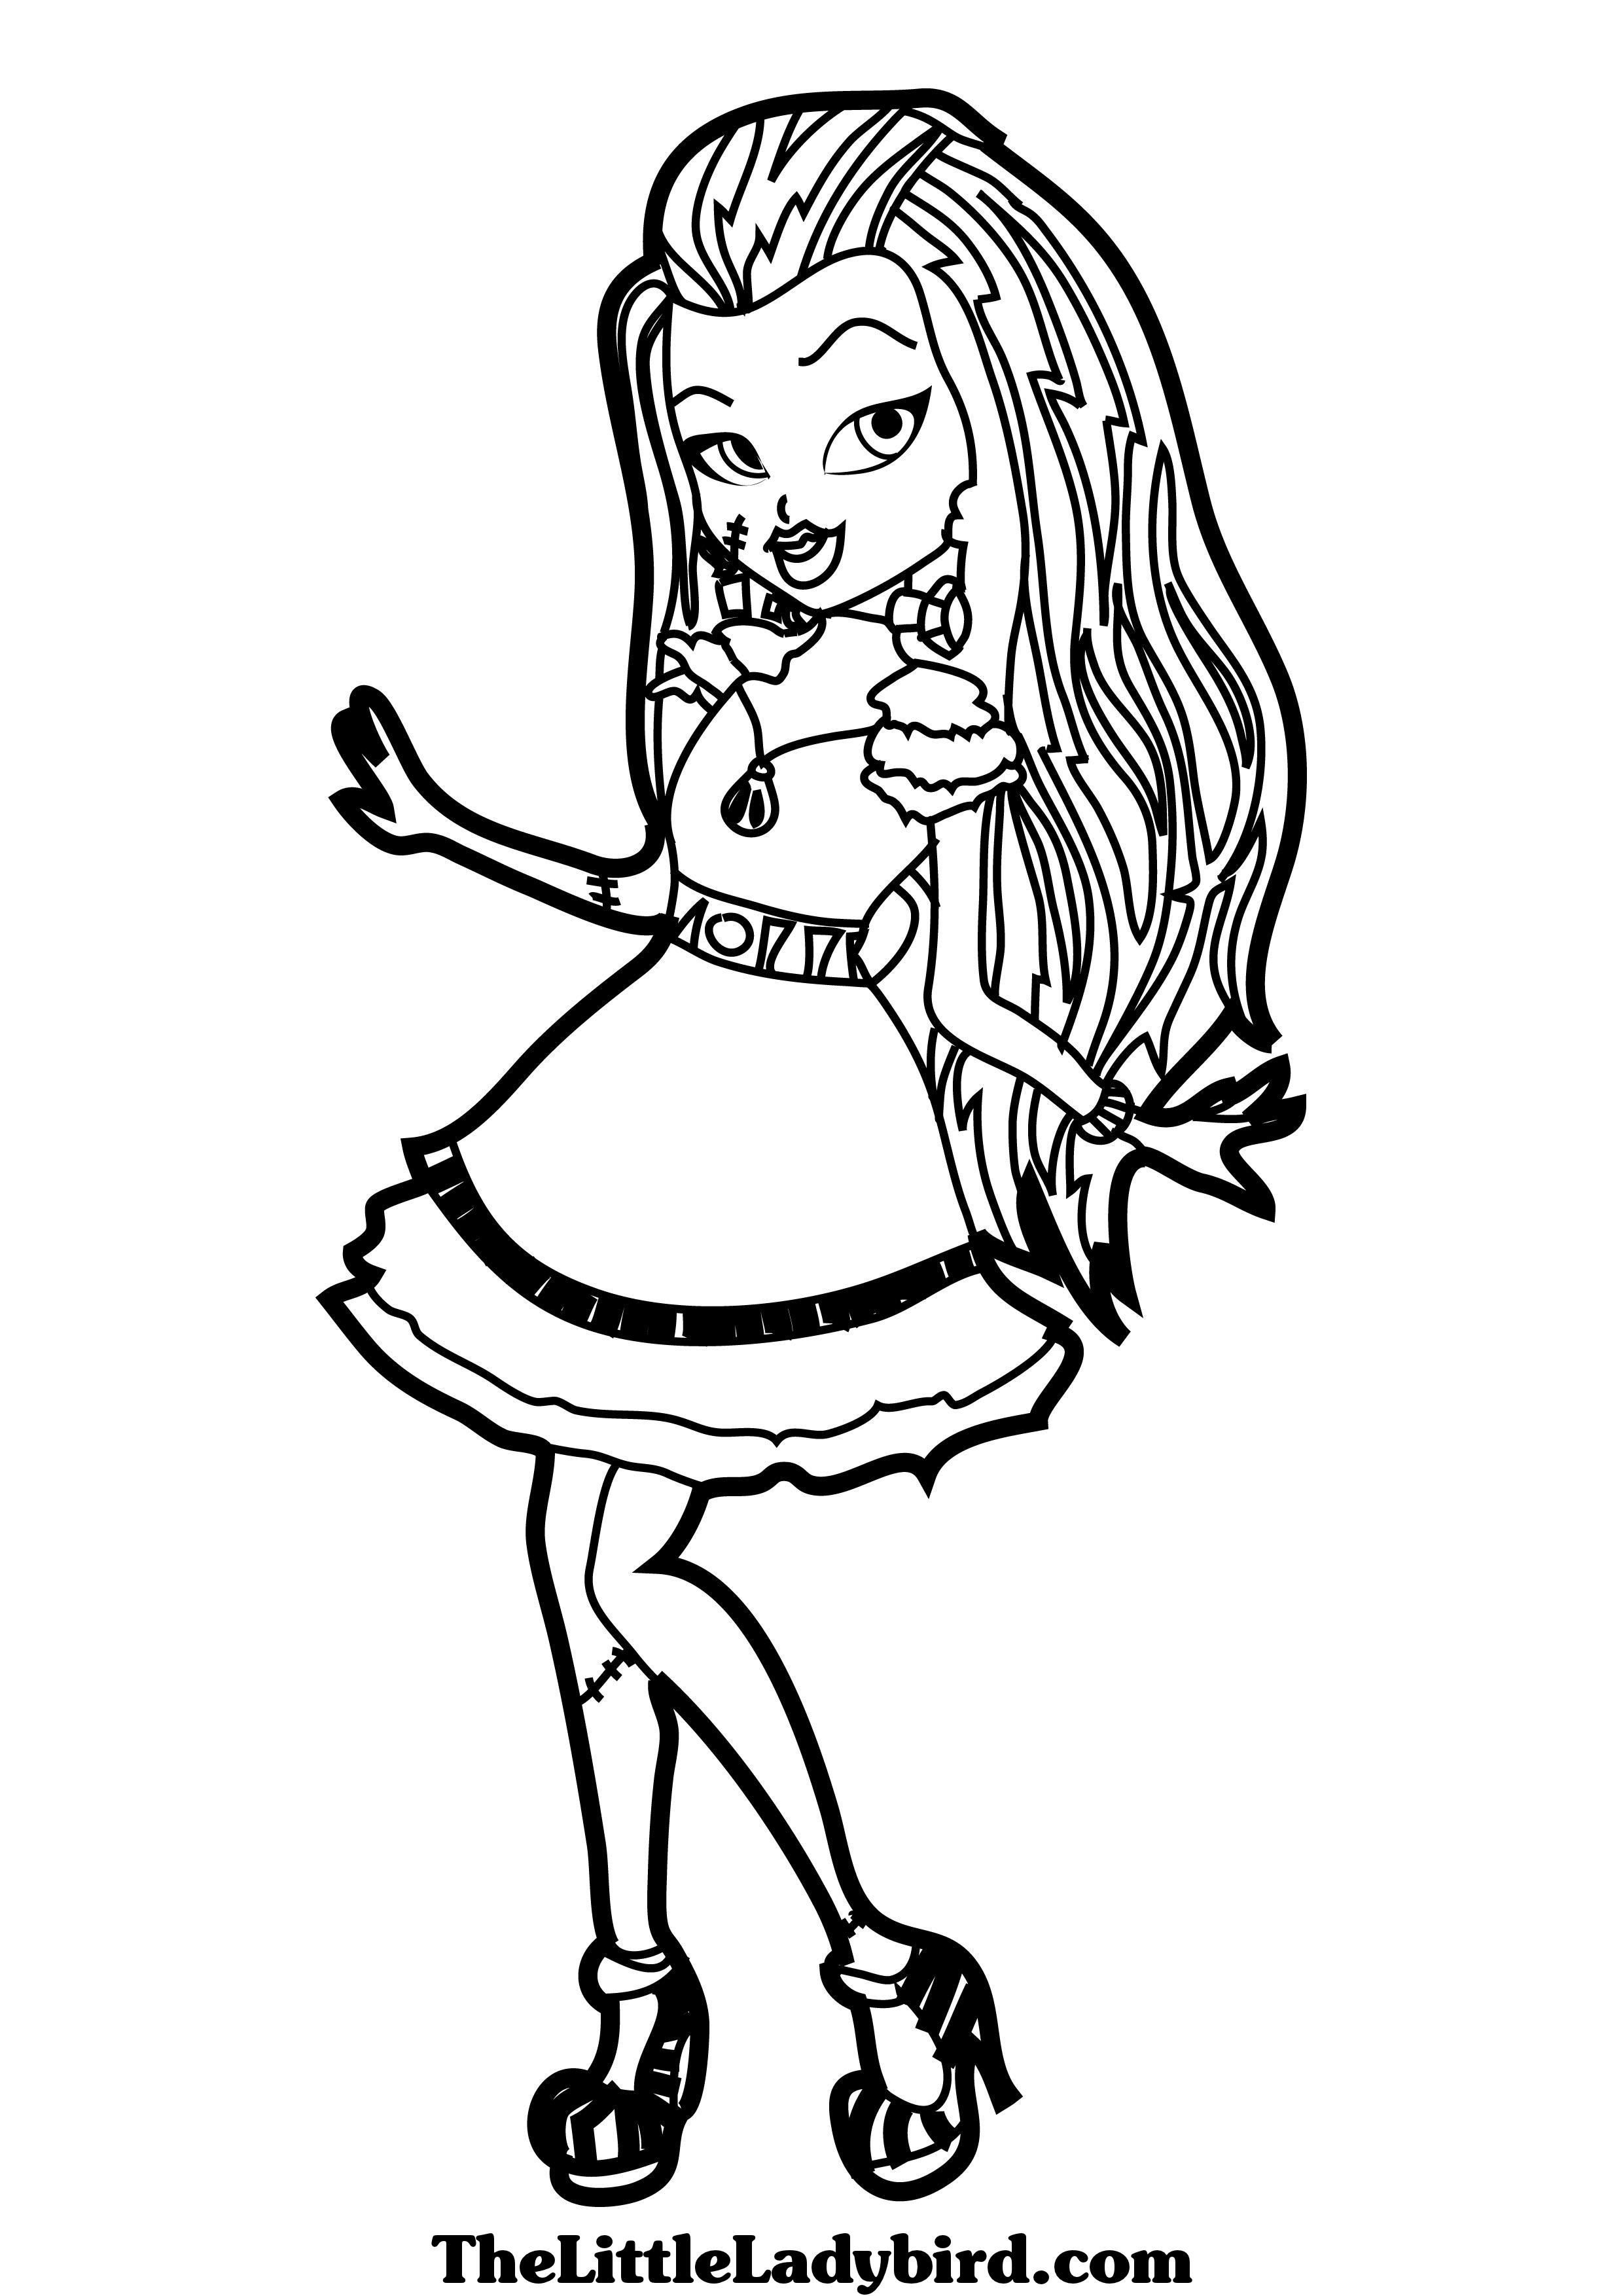  Monster High Coloring Pages | Coloring pages for Girls | Cool coloring page | #8